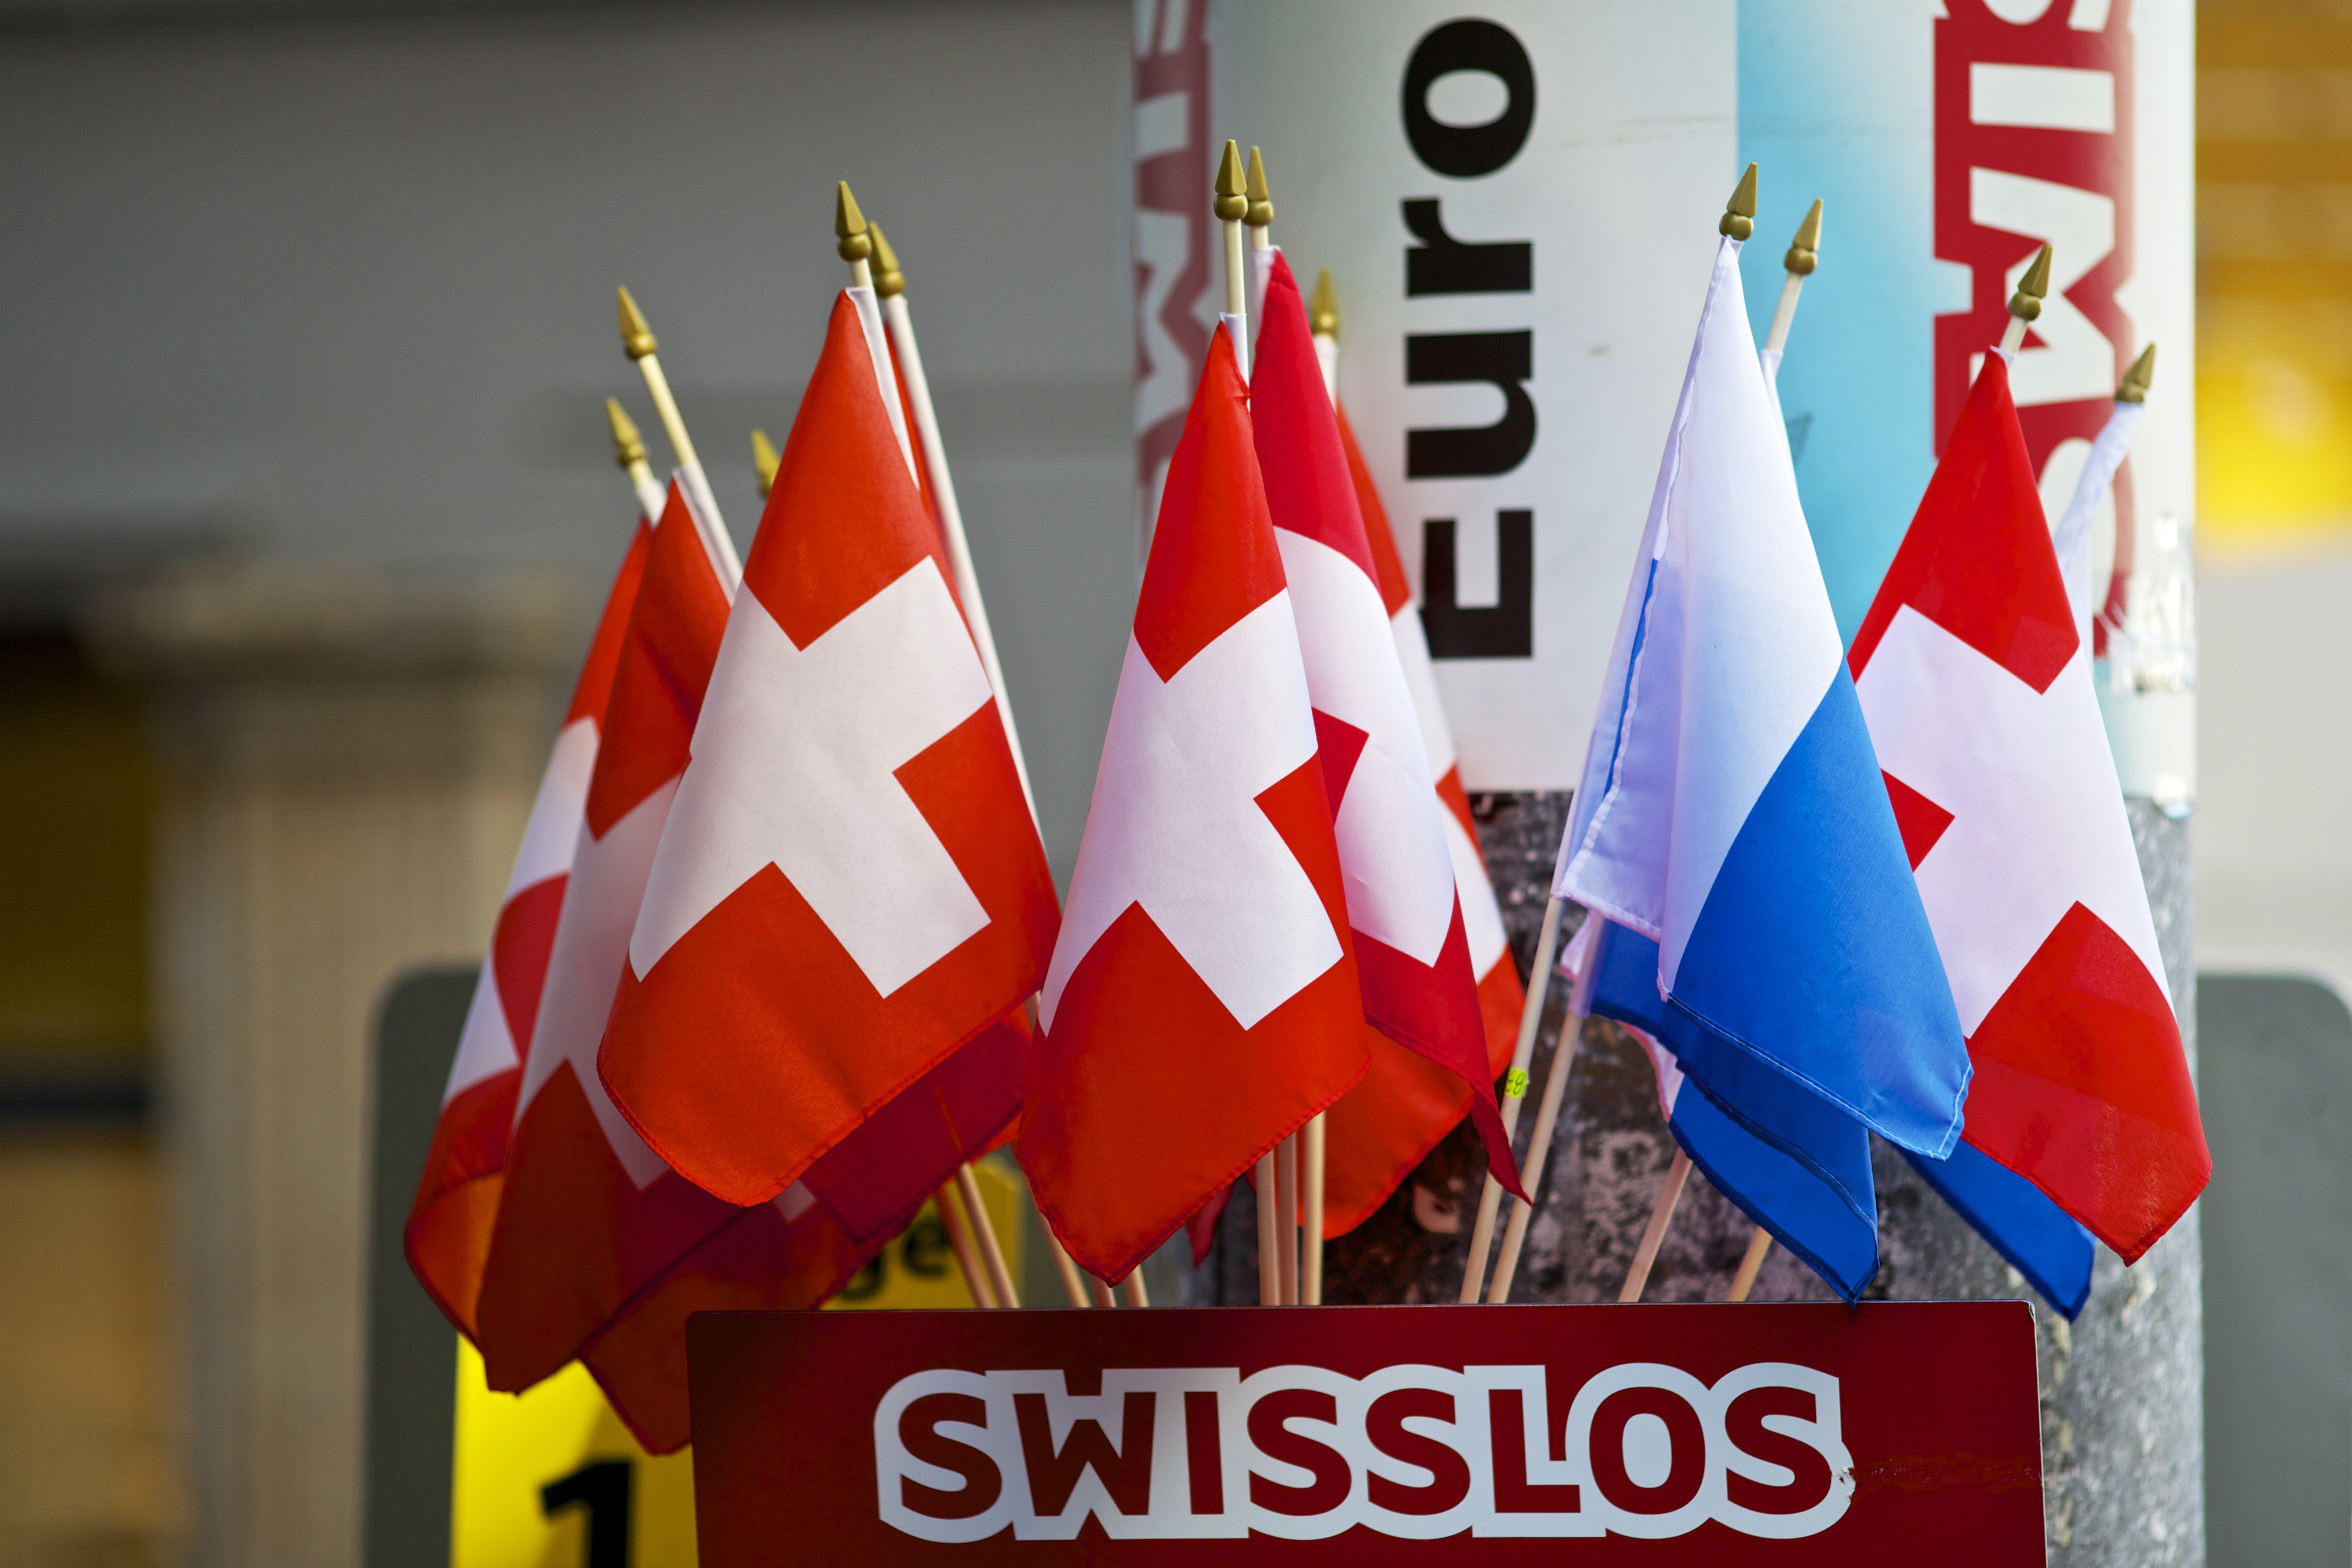 Swiss flags on display in a kiosk in Lucern, Switzerland, on Saturday August 10th, 2013.
